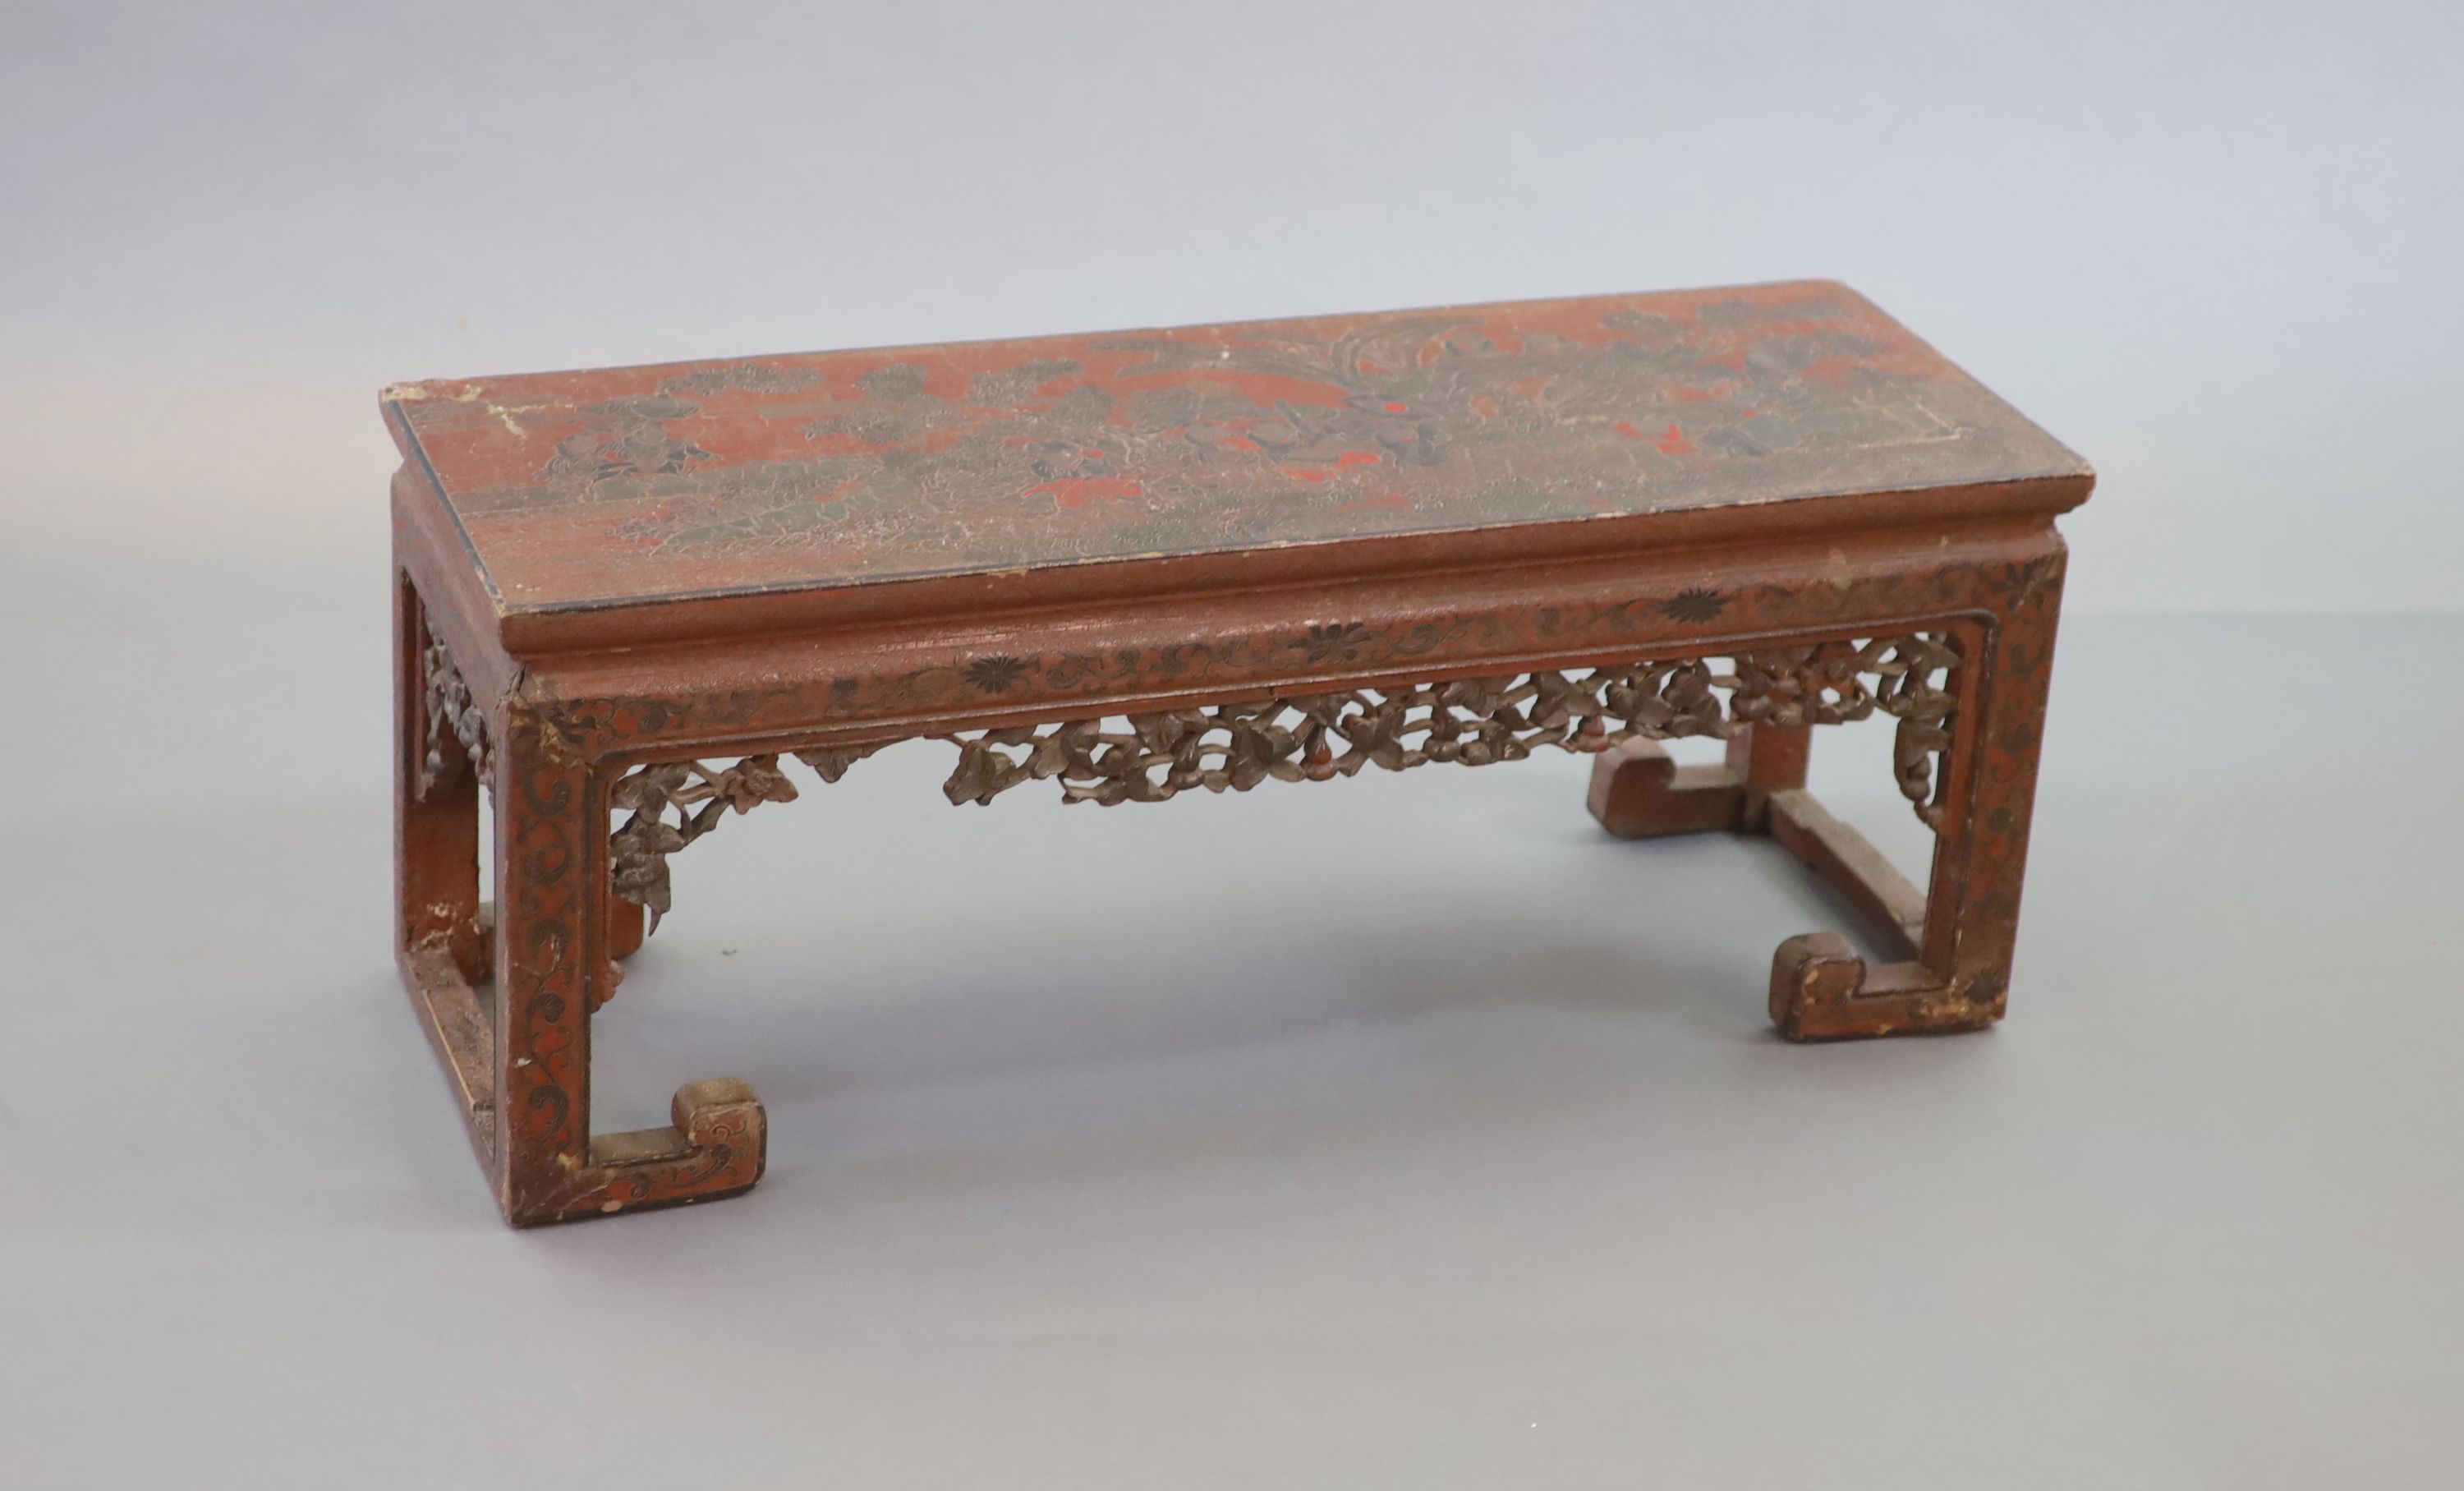 A Chinese coromandel lacquer table or stand, 18th century, 88cm long, 31.5cm long, 35cm high, losses